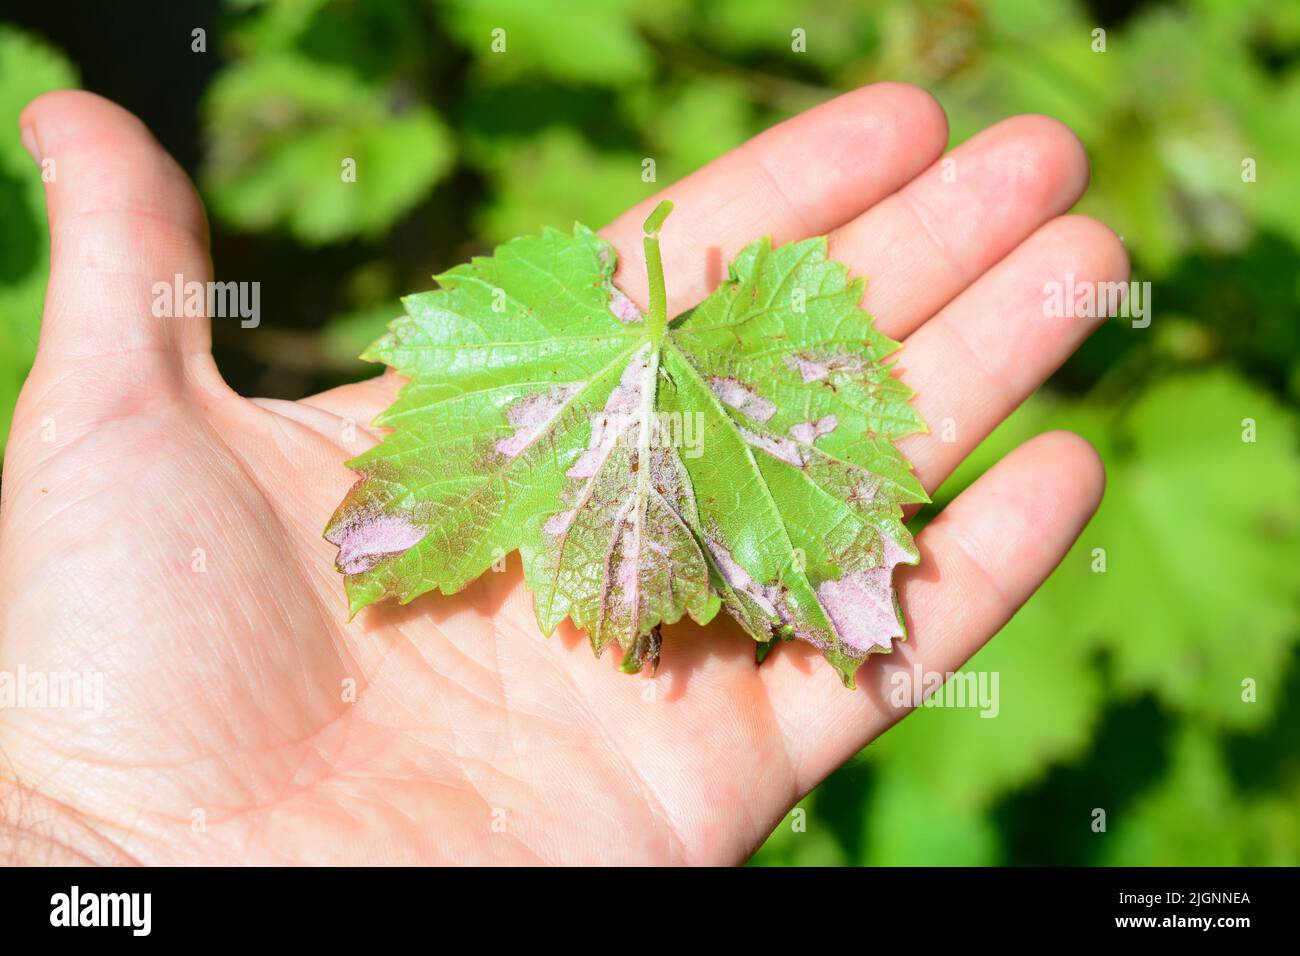 Grapevine infected by mildew grapevine disease. A grape's leaf with white downy fungal on the underside of the leaf. Stock Photo